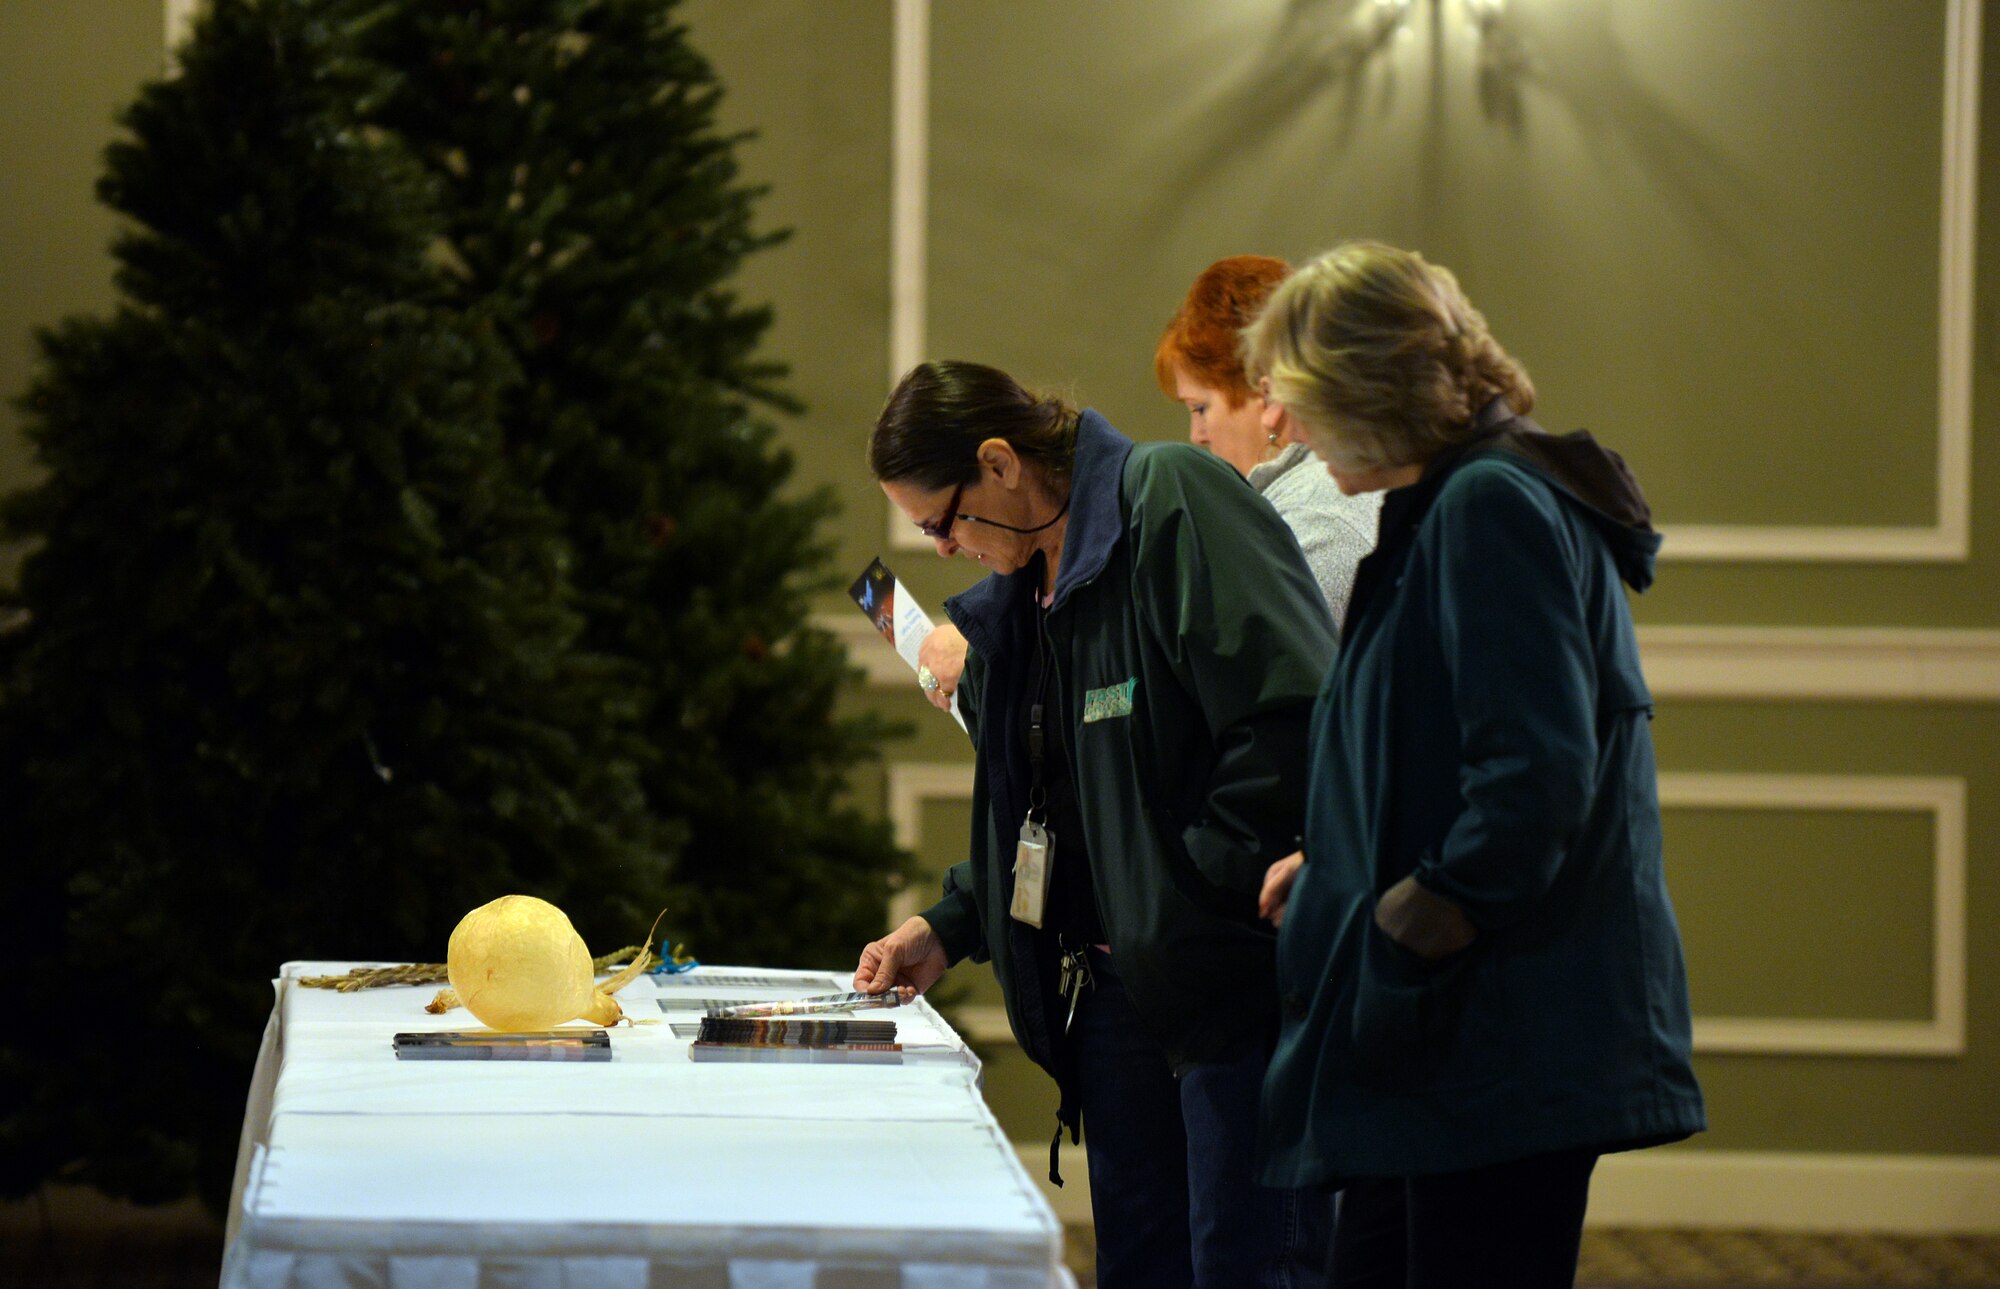 Members of Team Offutt browse artifacts on loan from the Durham Museum Nov. 18, 2015, during the Native American Heritage Month Cultural Information Fair and Expo at the Patriot Club, Offutt Air Force Base, Neb. The Museum is located in downtown Omaha inside an old train station. (U.S. Air Force photo by Josh Plueger)